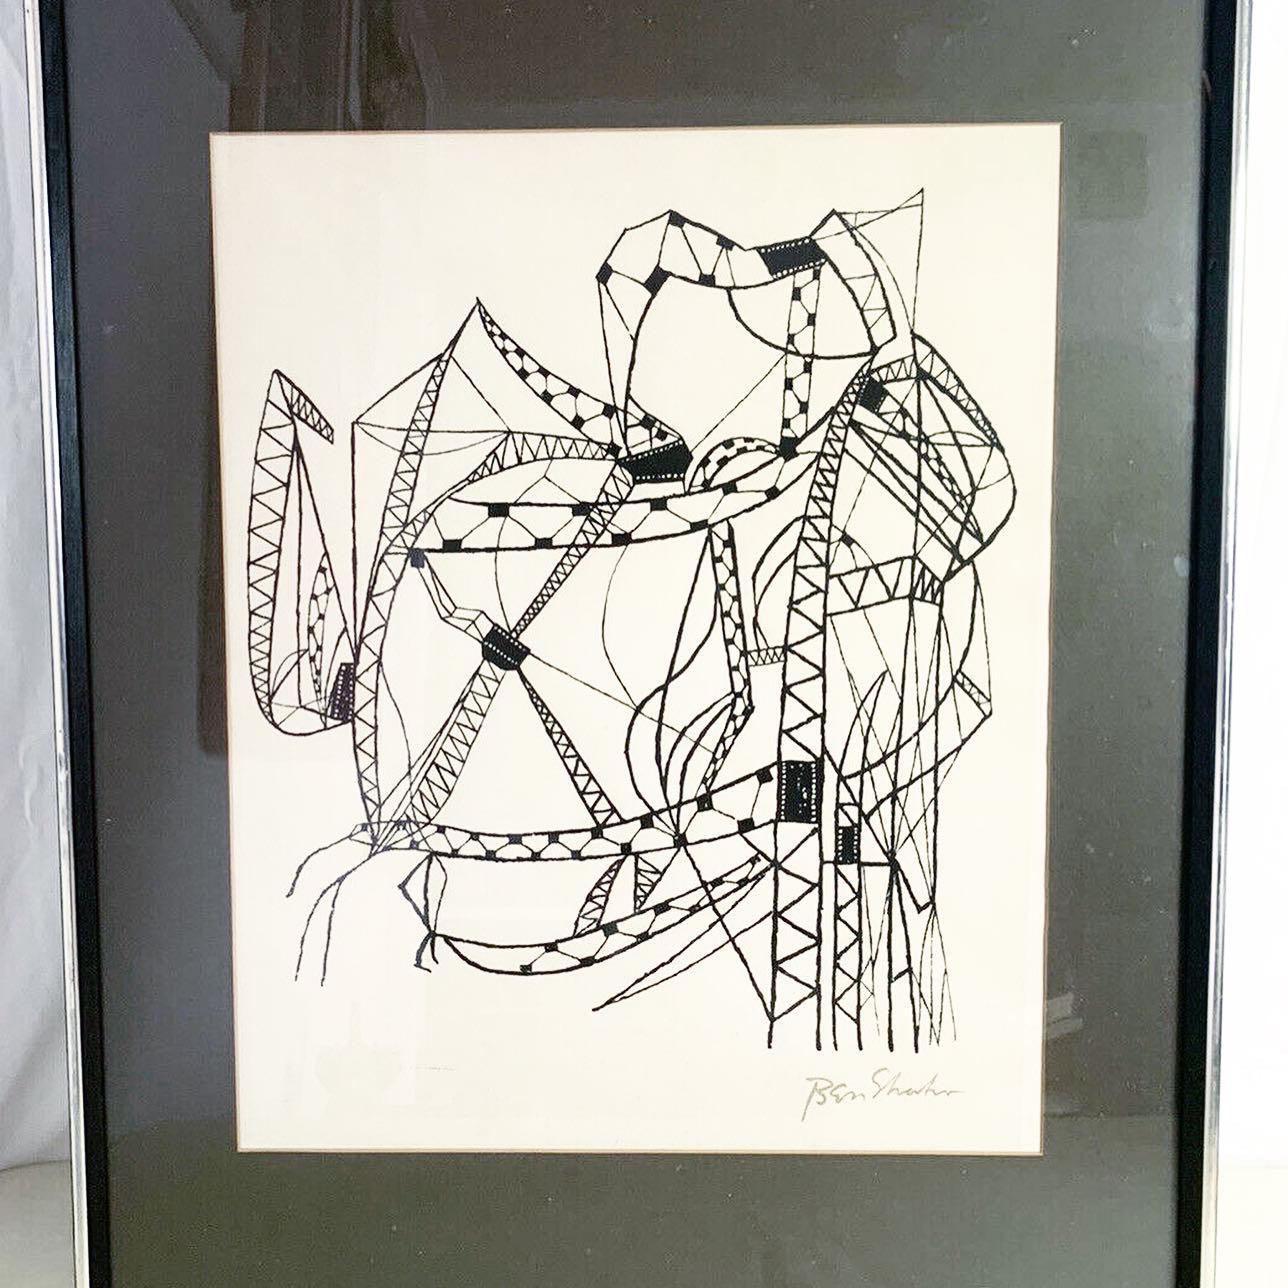 American Many Cities from the Rilke Portfolio, Framed Lithograph by Ben Shahn 1968 For Sale